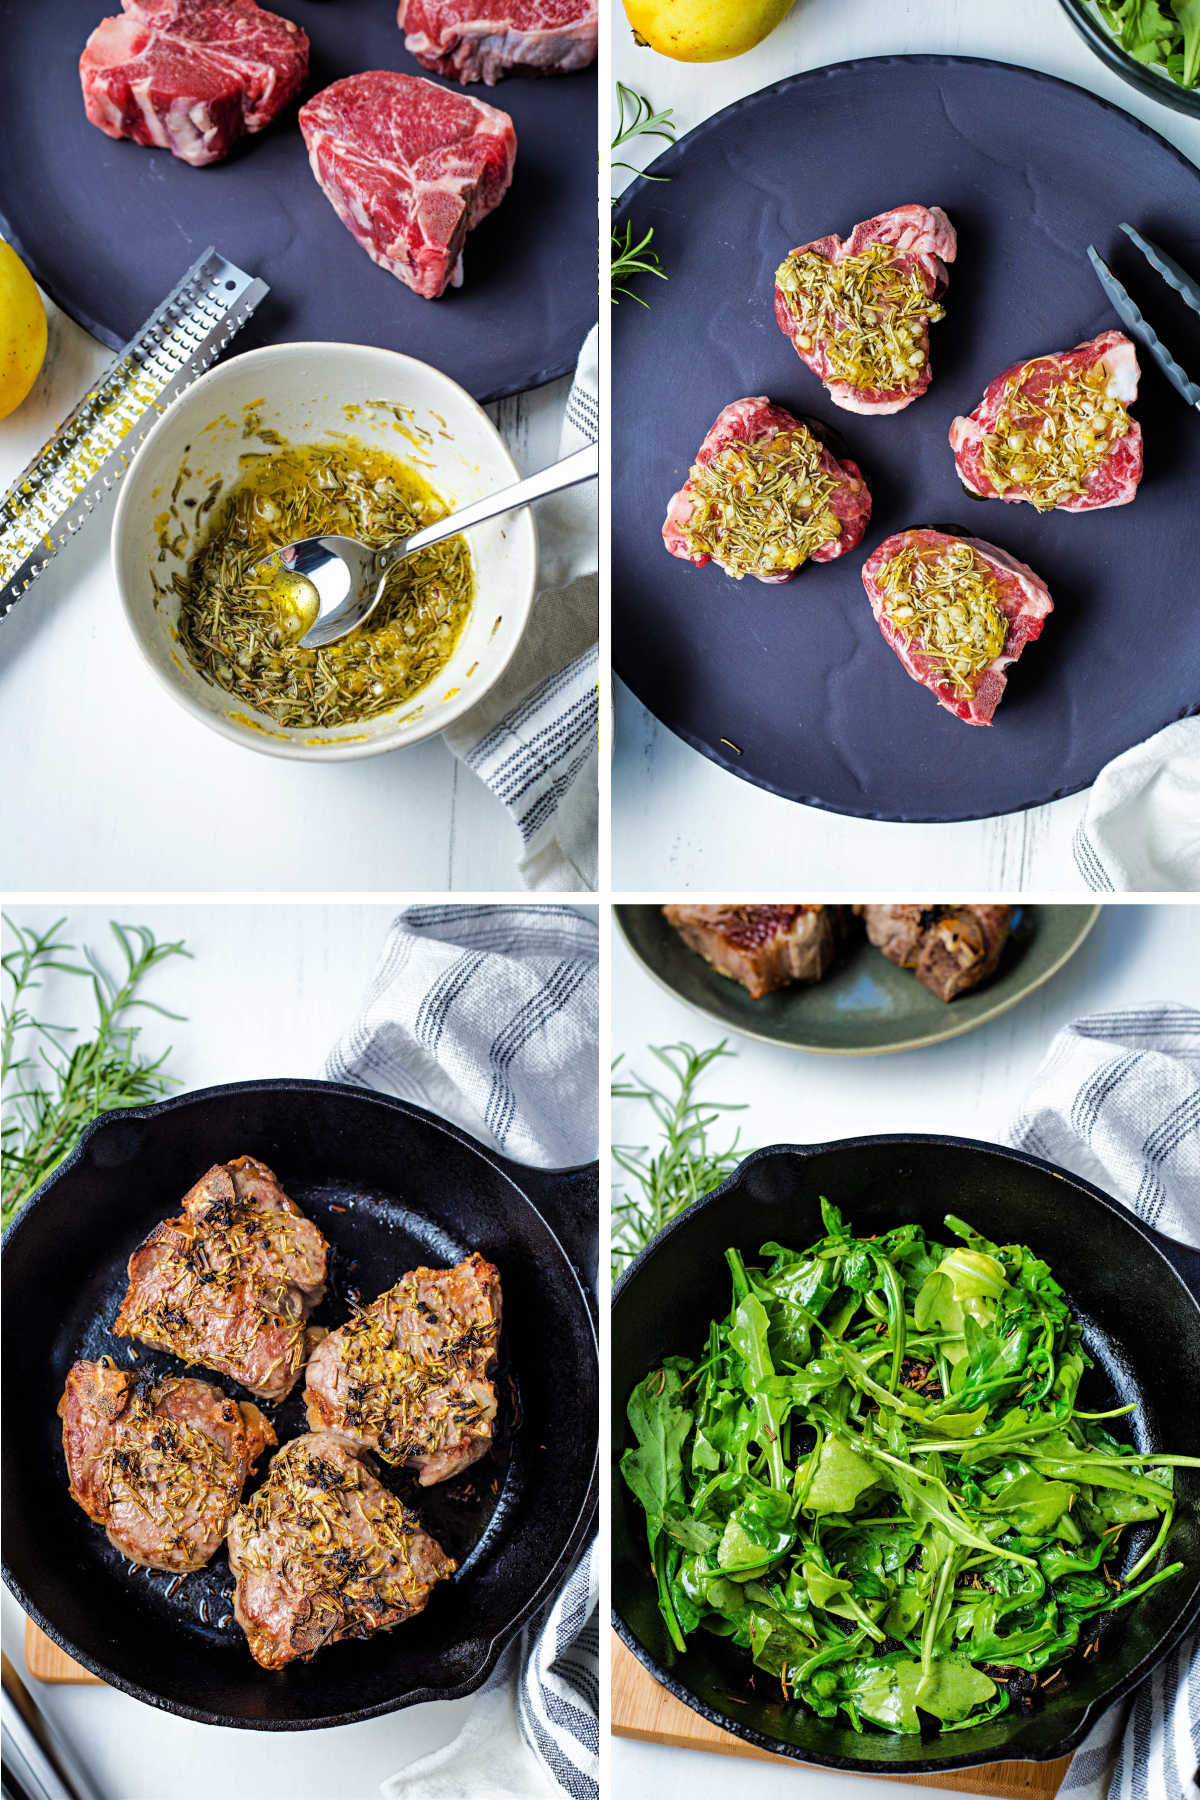 process steps for preparing broiled lamb chops: make a paste with rosemary, garlic, olive oil, and lemon; drizzle over lamb chops; place in hot cast iron pan; wilt arugula in pan juices.